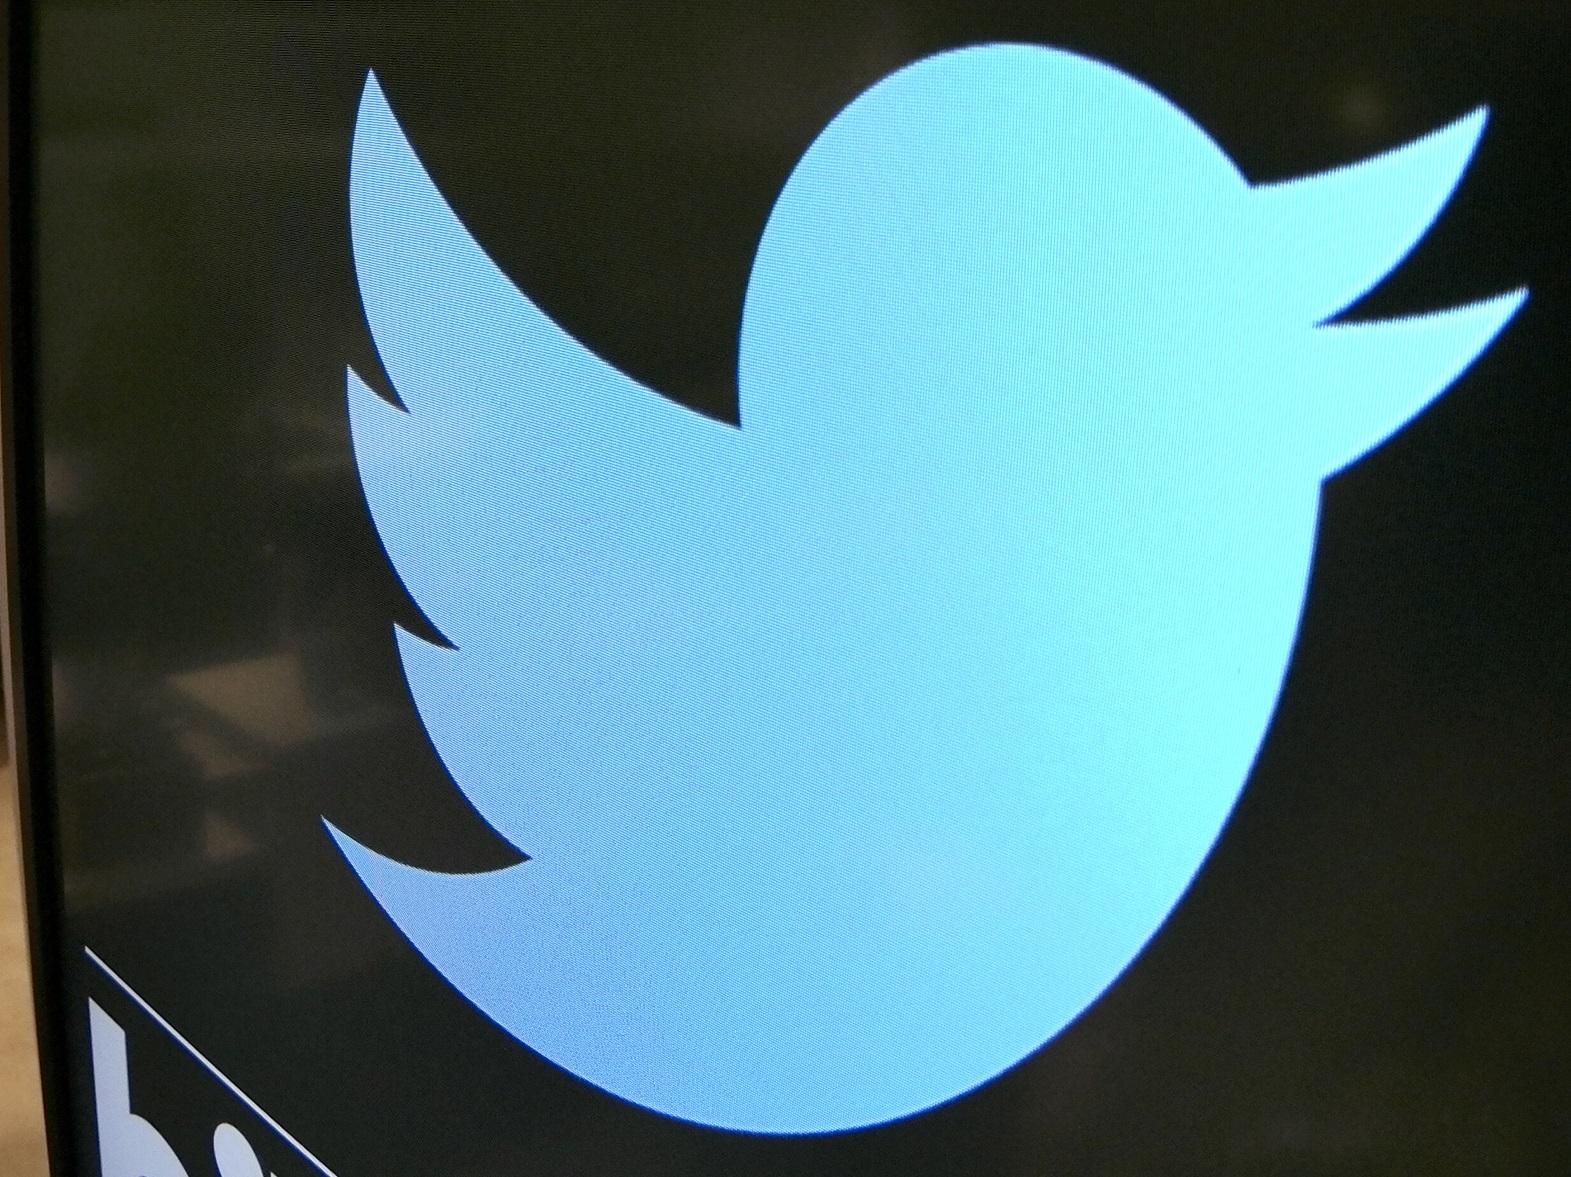 Twitter rules out French government advertising over anti-fake news law